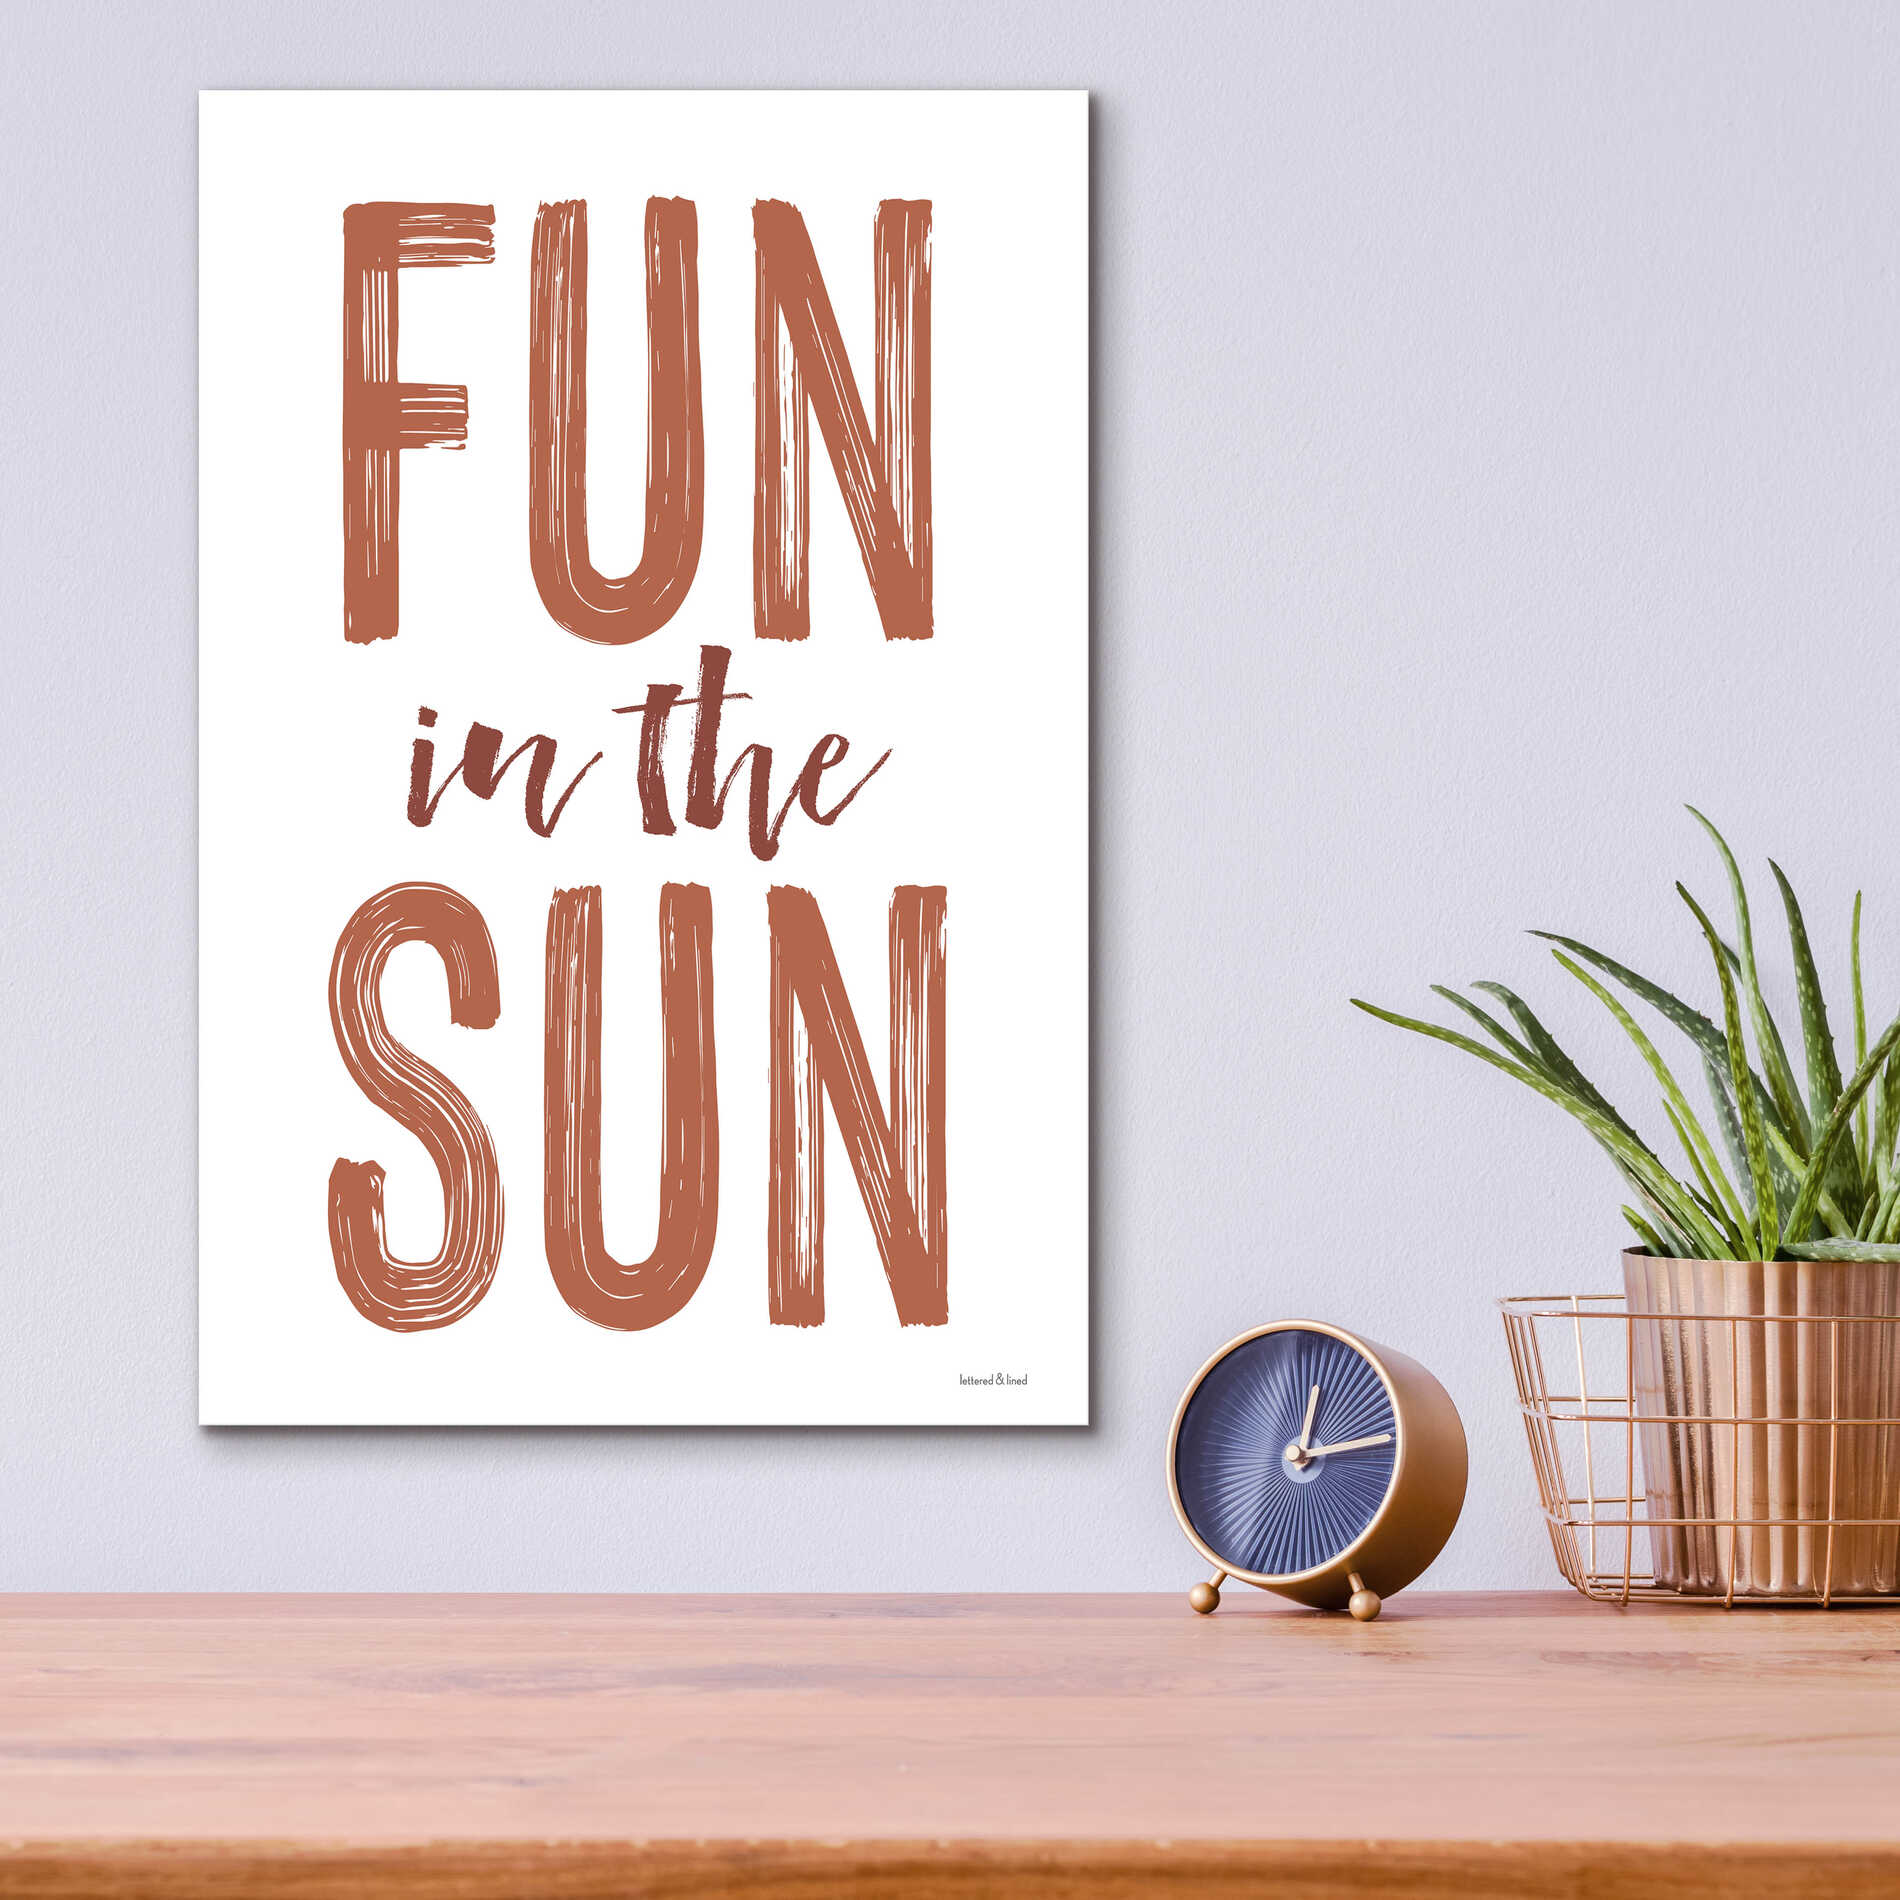 Epic Art 'Fun in the Sun Brown' by Lettered & Lined, Acrylic Glass Wall Art,12x16